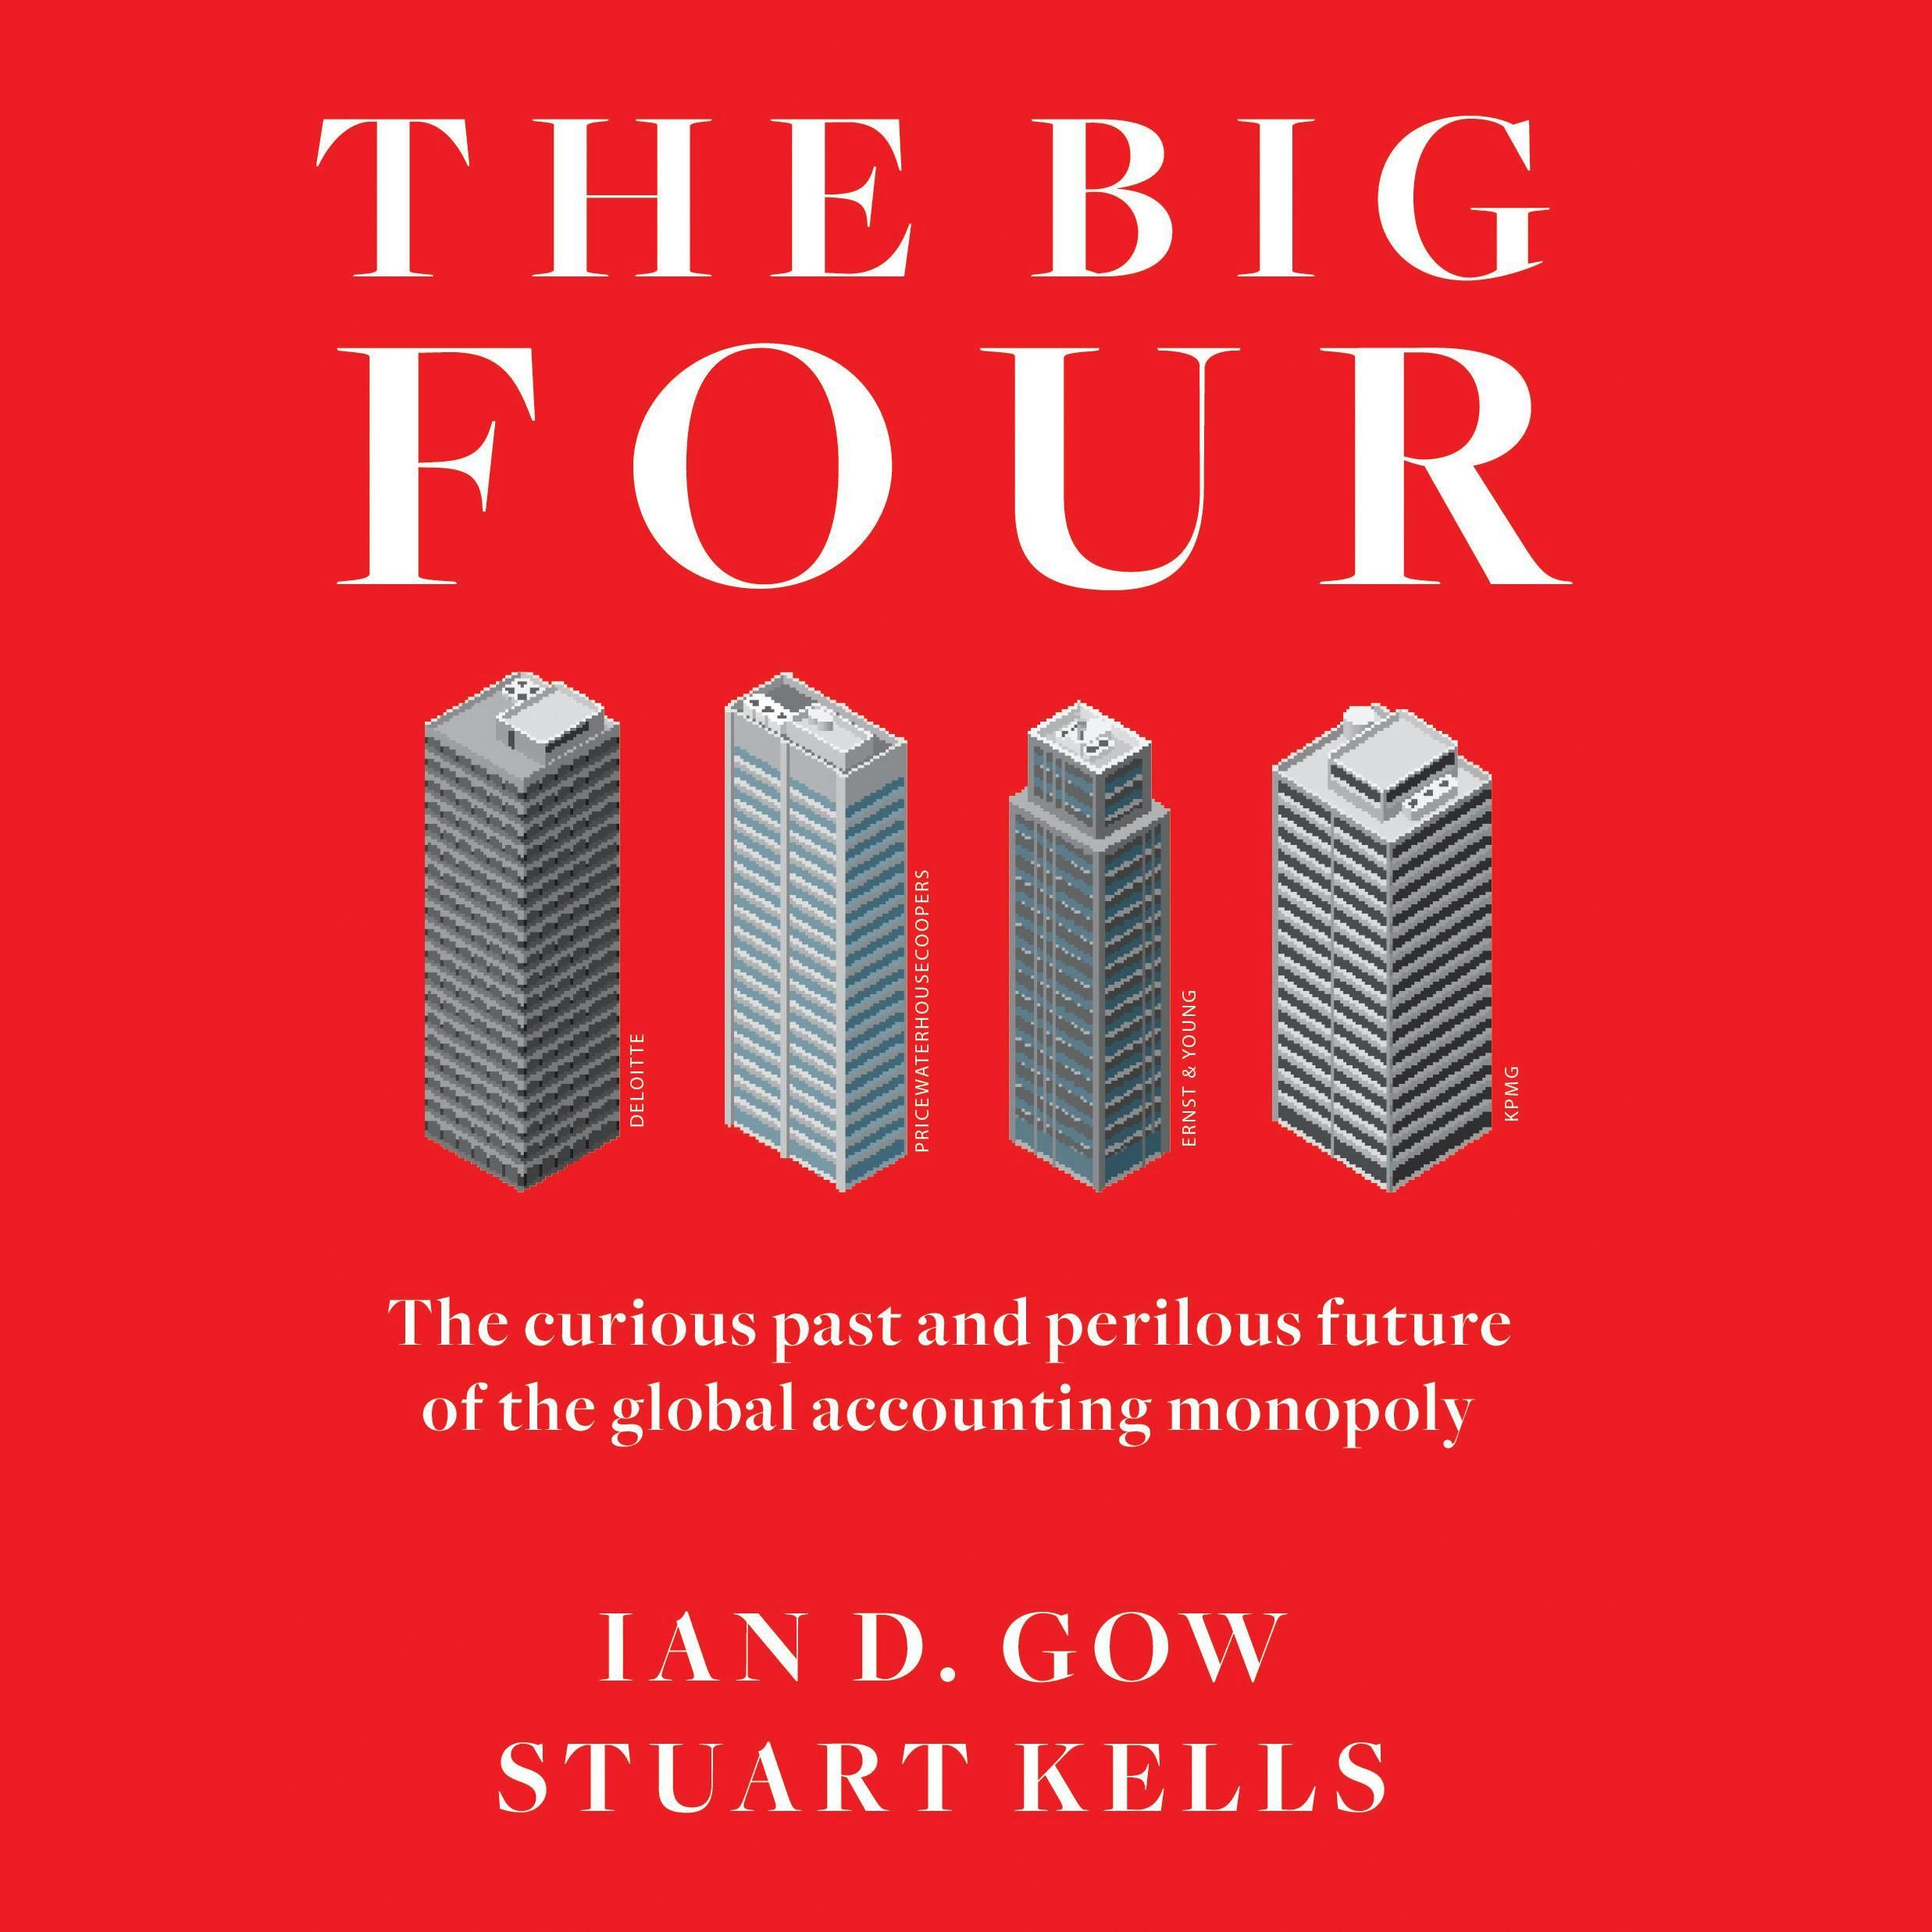 The Big Four: The Curious Past and Perilous Future of the Global Accounting Monopoly - Stuart Kells, Ian D. Gow